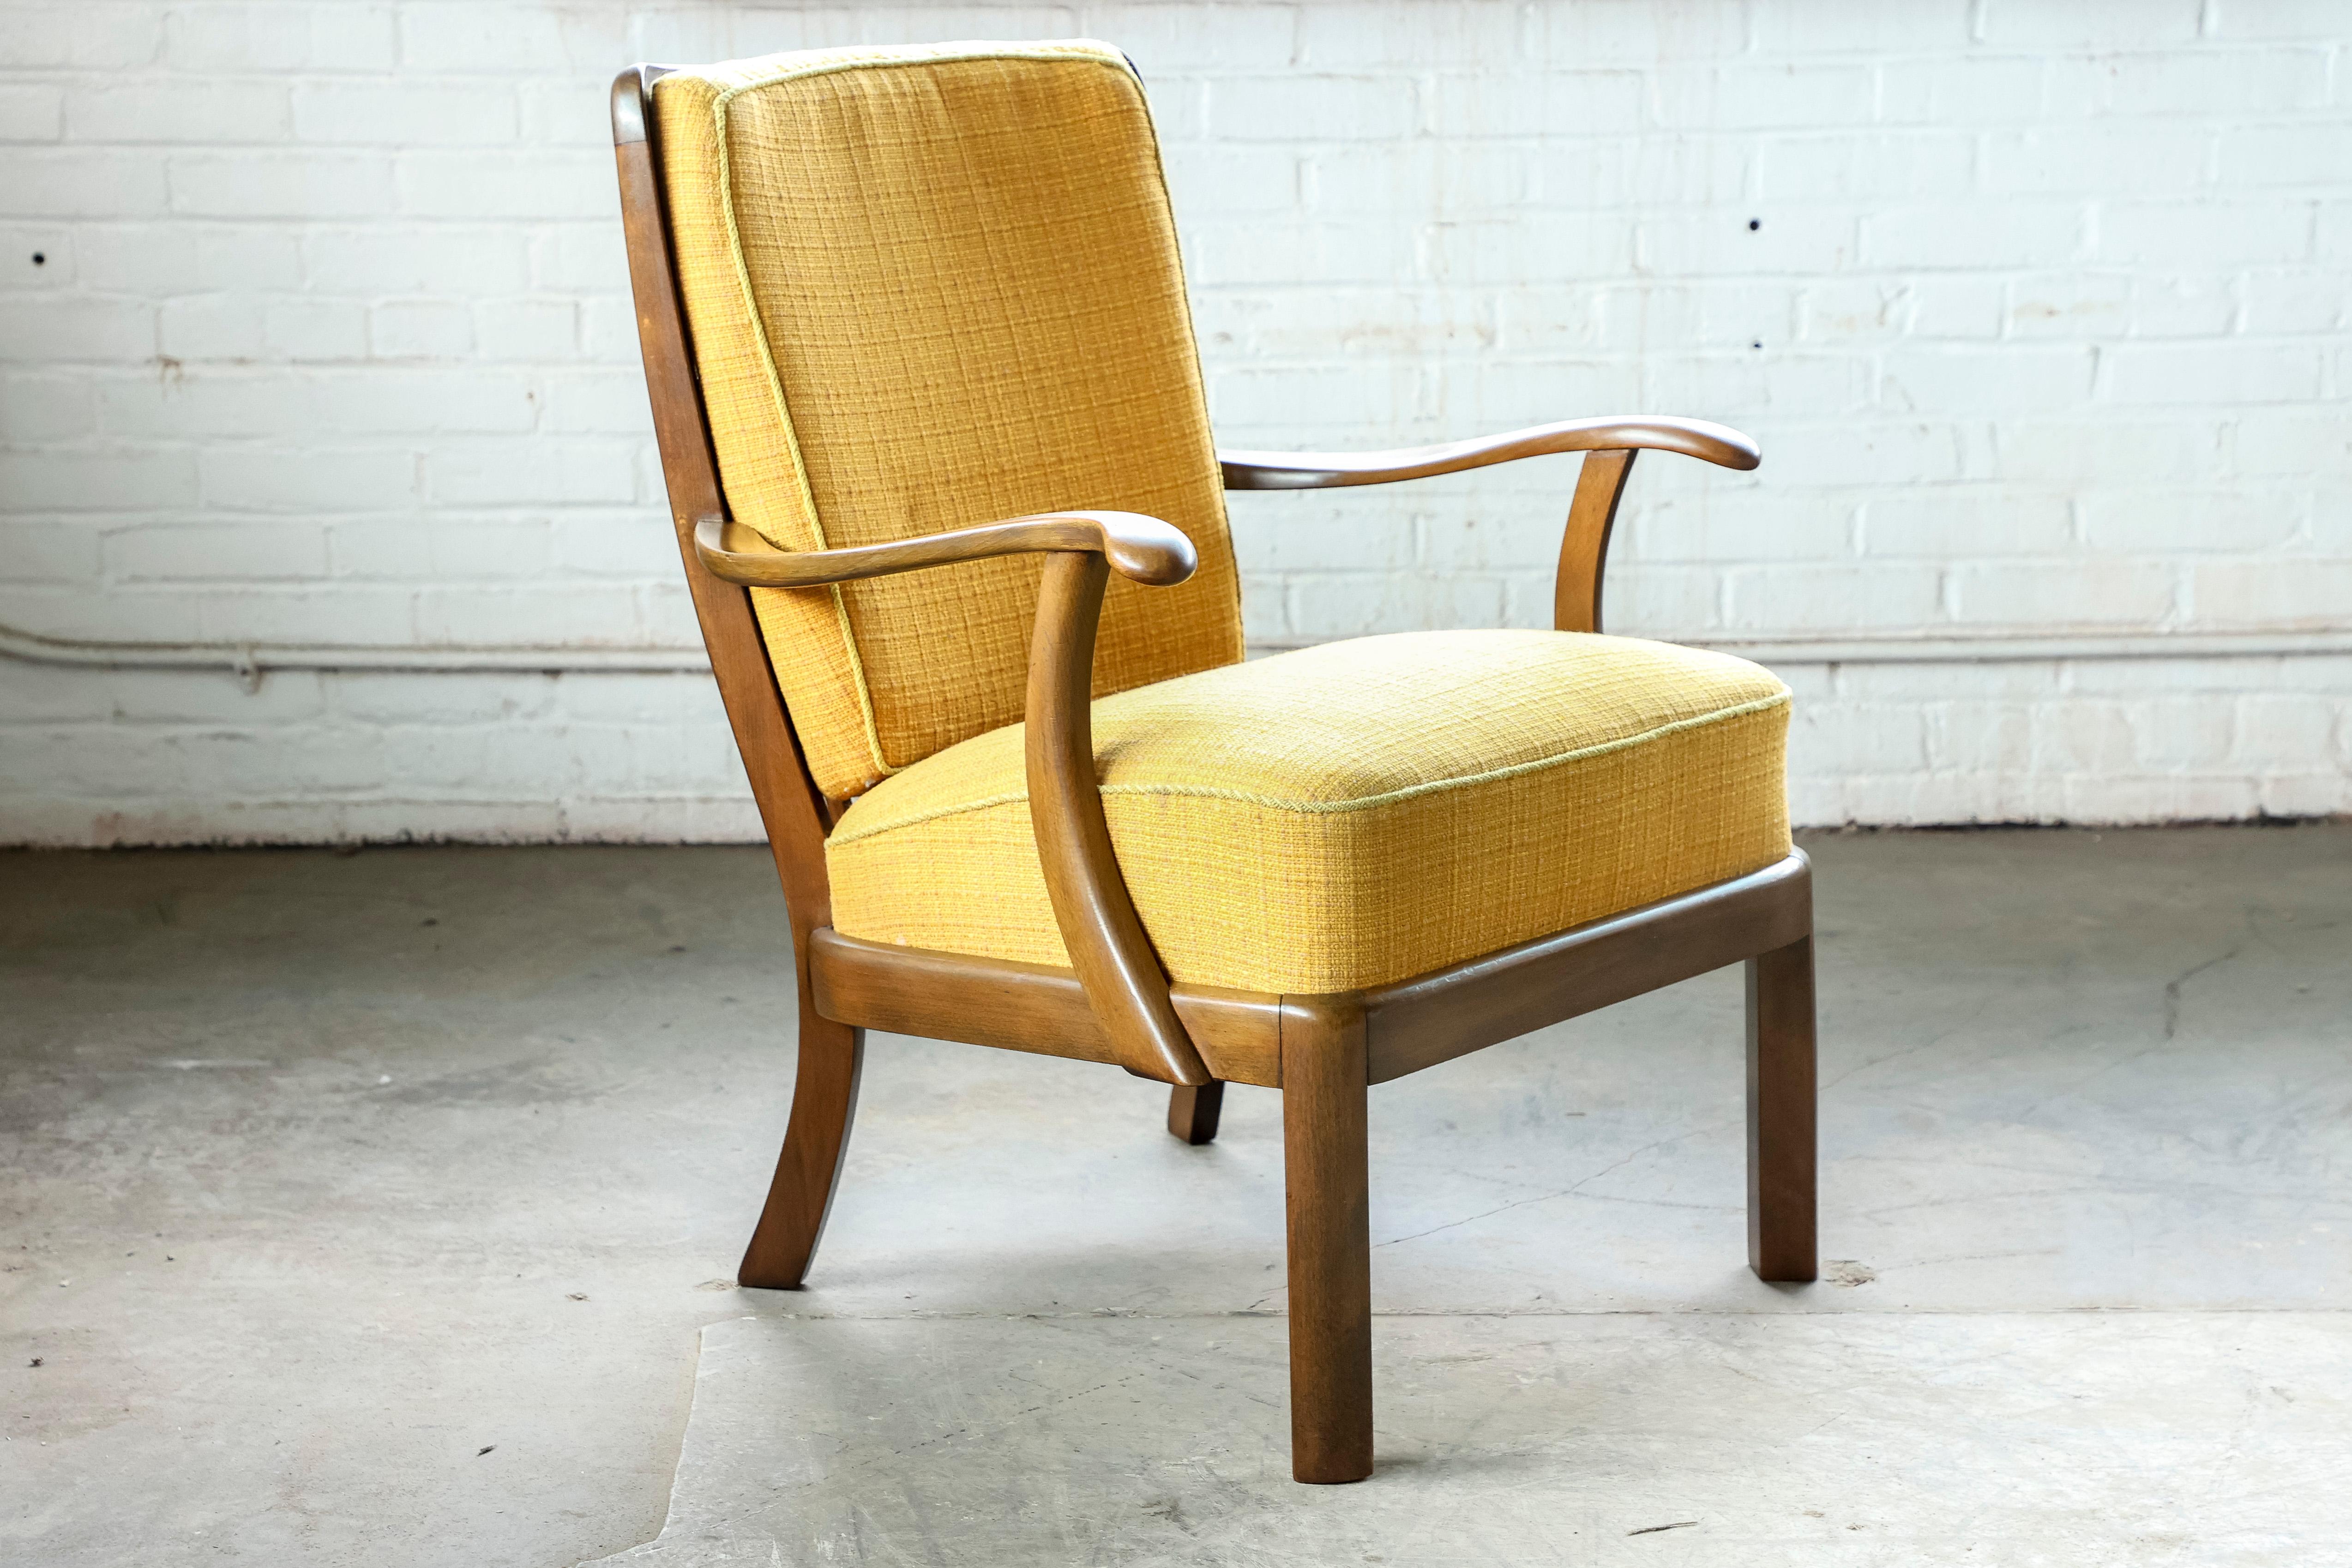 Beautiful high quality easy chair, circa late 1940's likely made by Master Carpenter, Edmund Jorgensen of Denmark. The chair is very much in his style although it is not marked and we are not sure of the maker and designer. Very elegant with the